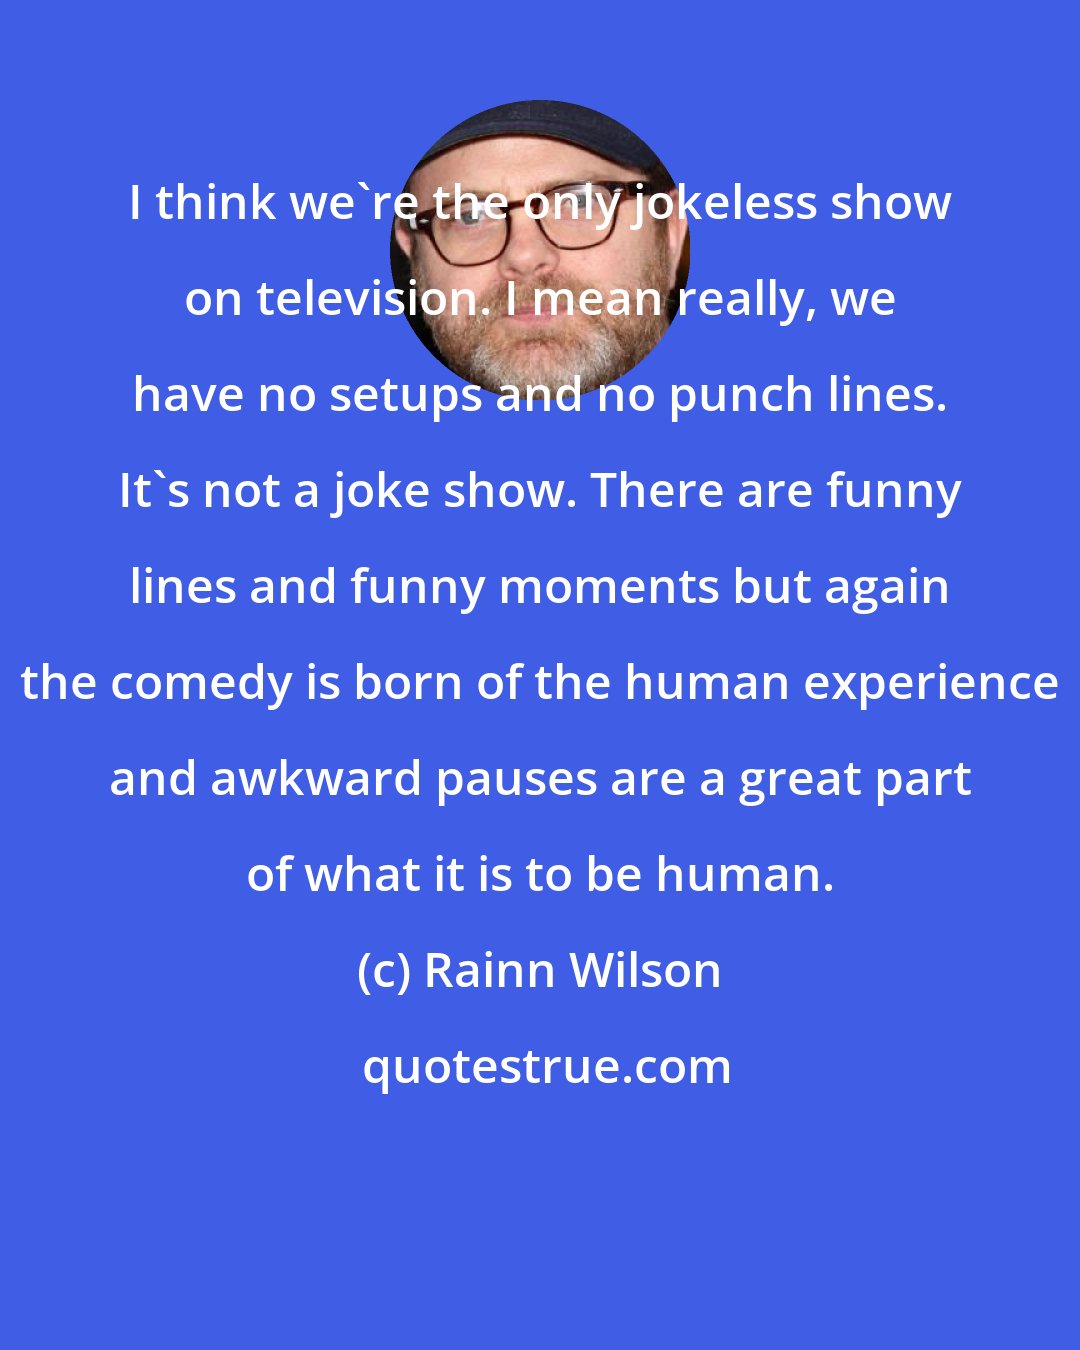 Rainn Wilson: I think we're the only jokeless show on television. I mean really, we have no setups and no punch lines. It's not a joke show. There are funny lines and funny moments but again the comedy is born of the human experience and awkward pauses are a great part of what it is to be human.